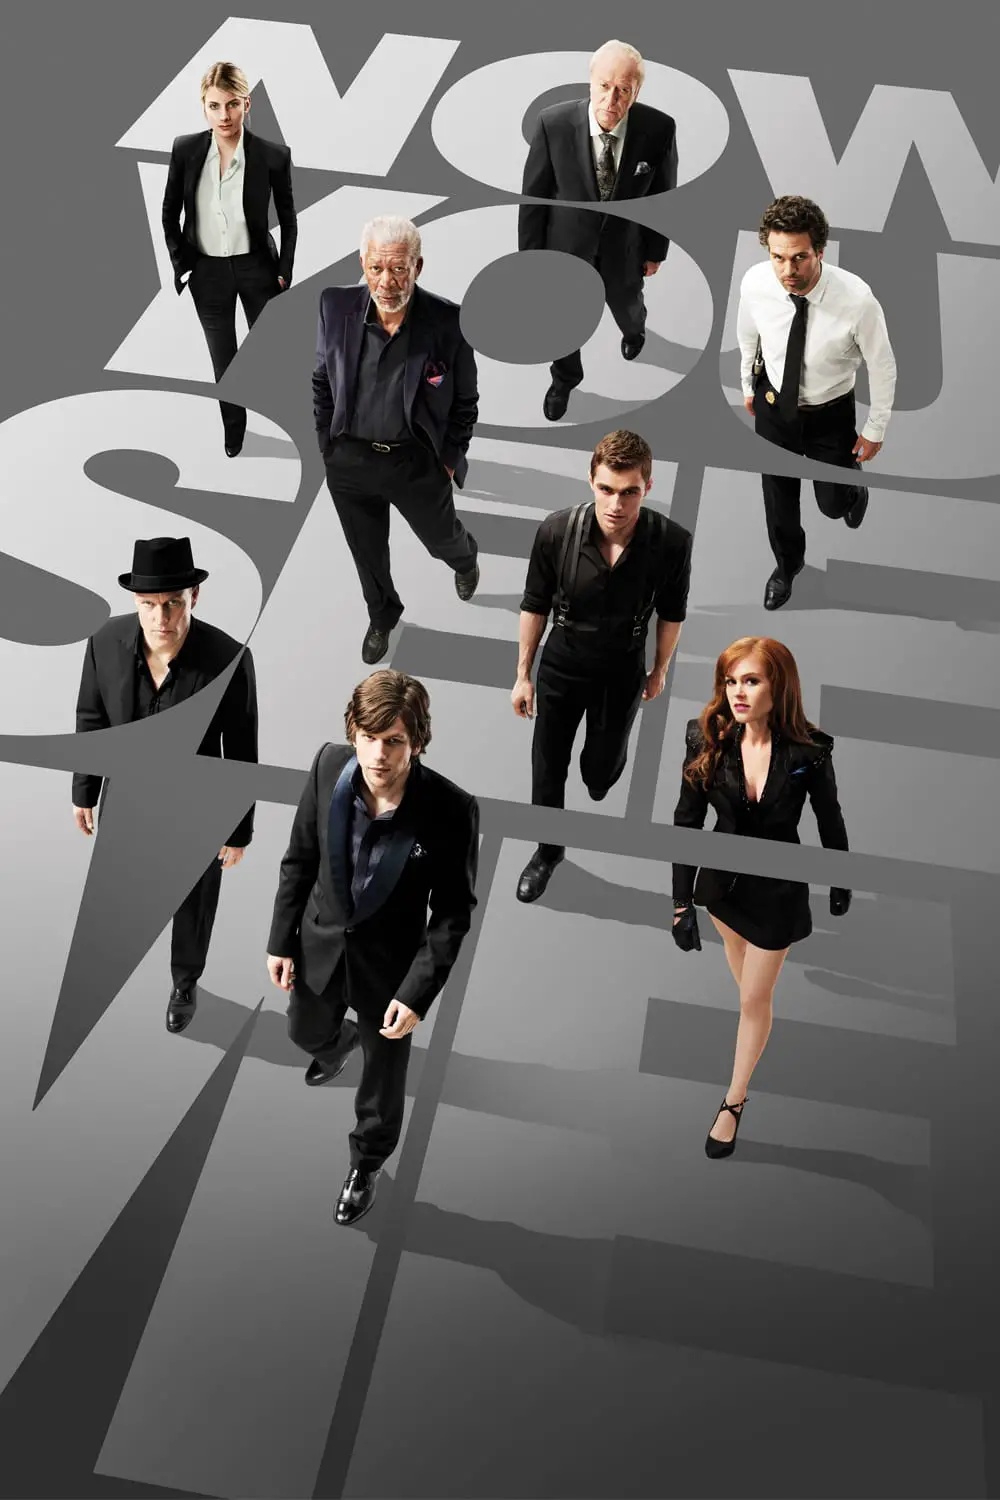 You are currently viewing Now You See Me